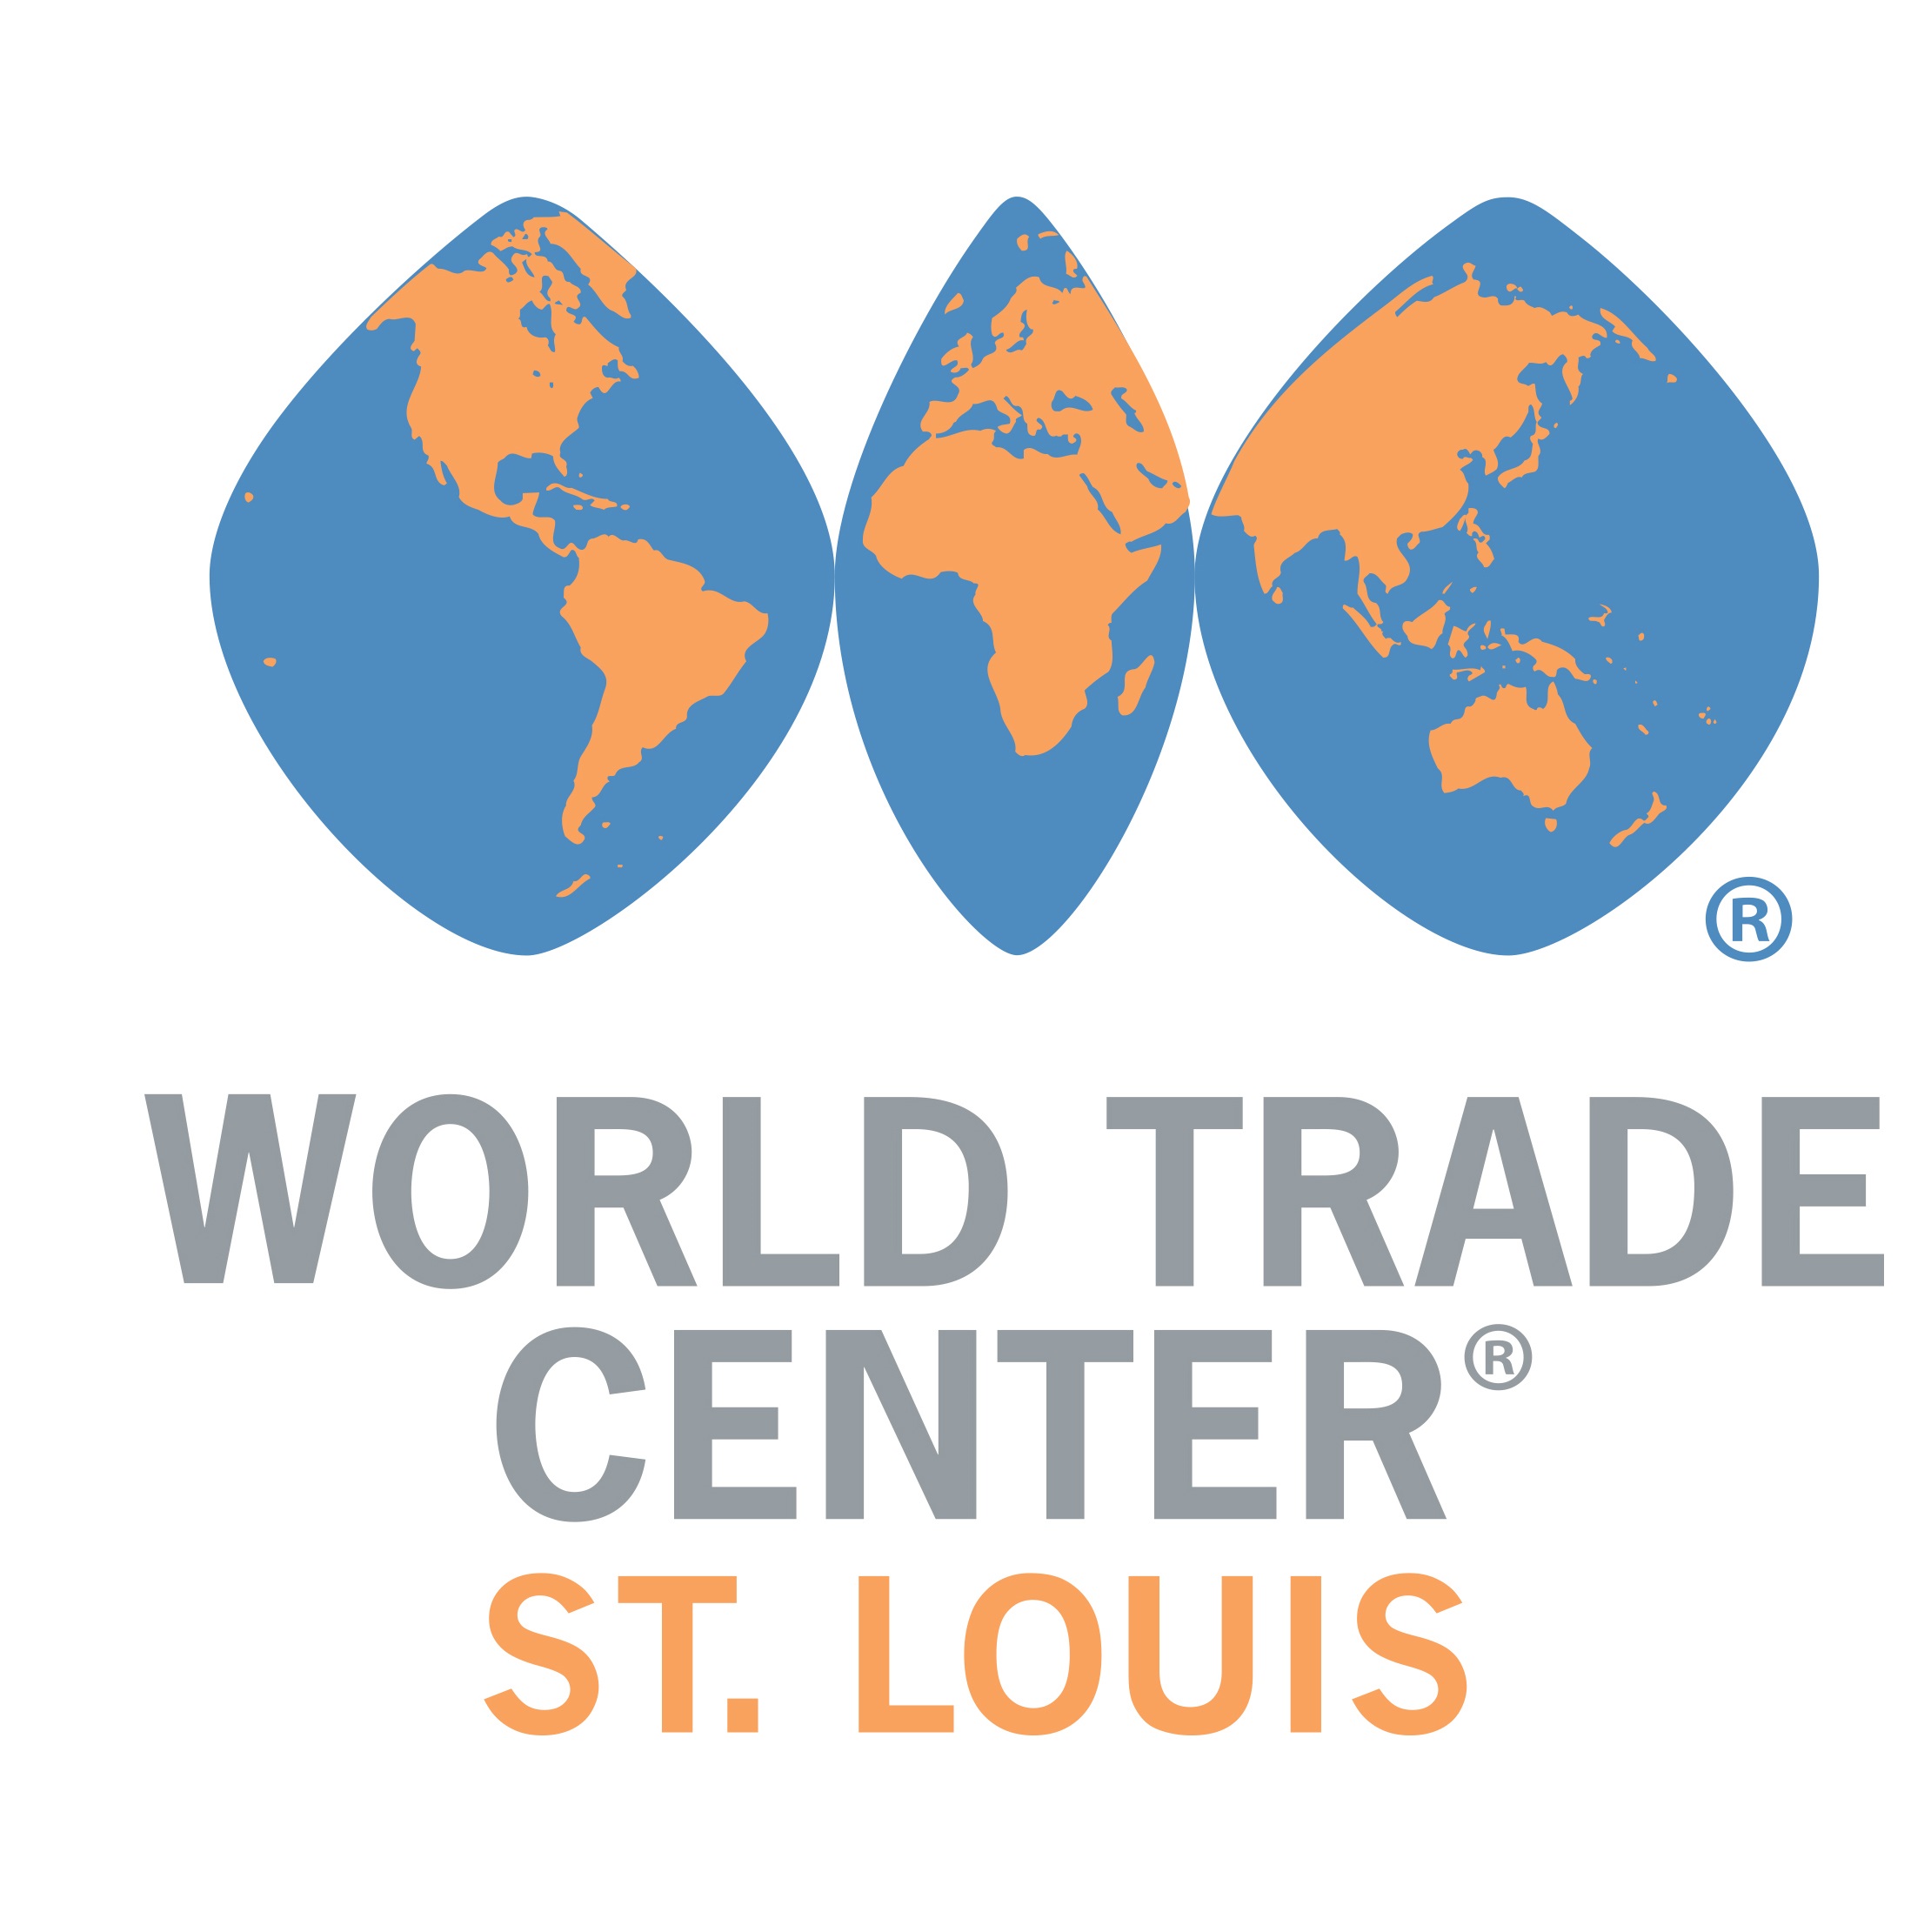 World Trade Center St. Louis Named 2021-2022 Champion by the World Trade Centers Association®